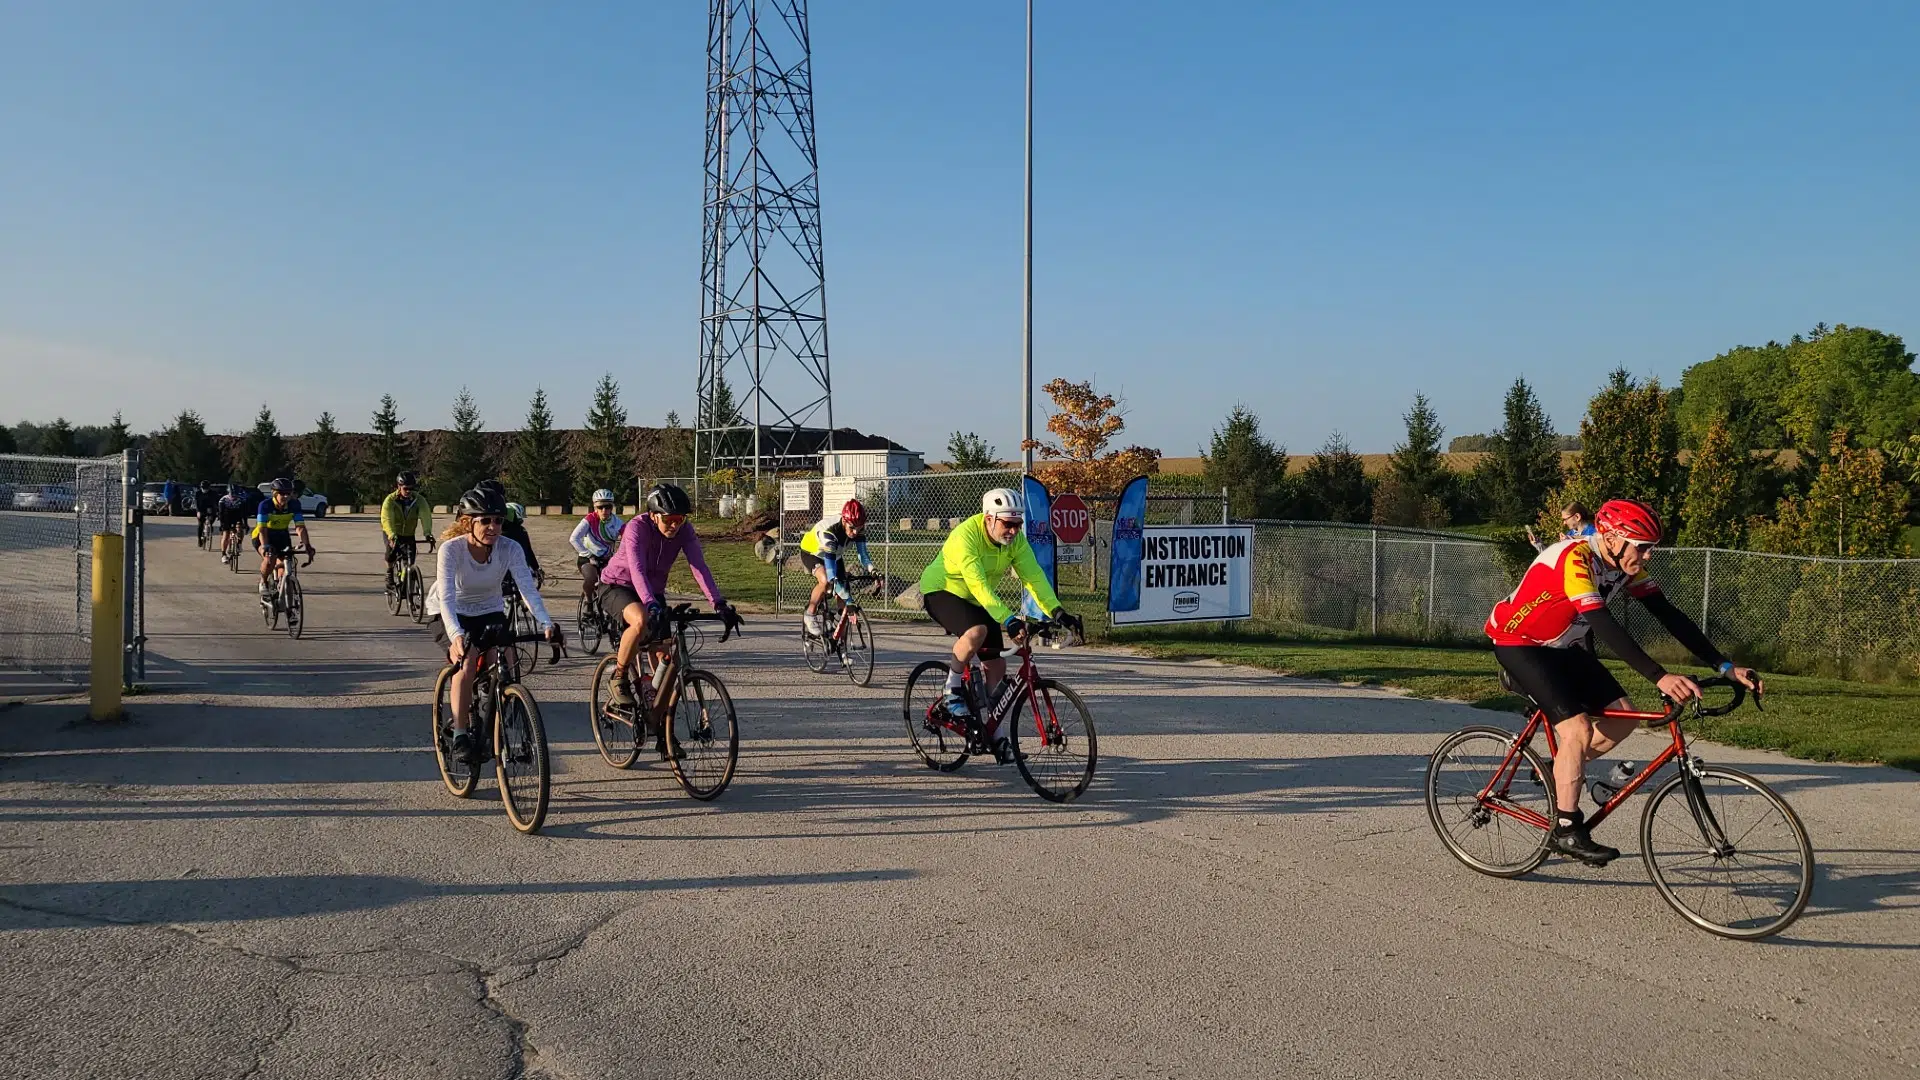 6th Annual Pedal for Portage Event Surpasses $50,000 Fundraising Goal